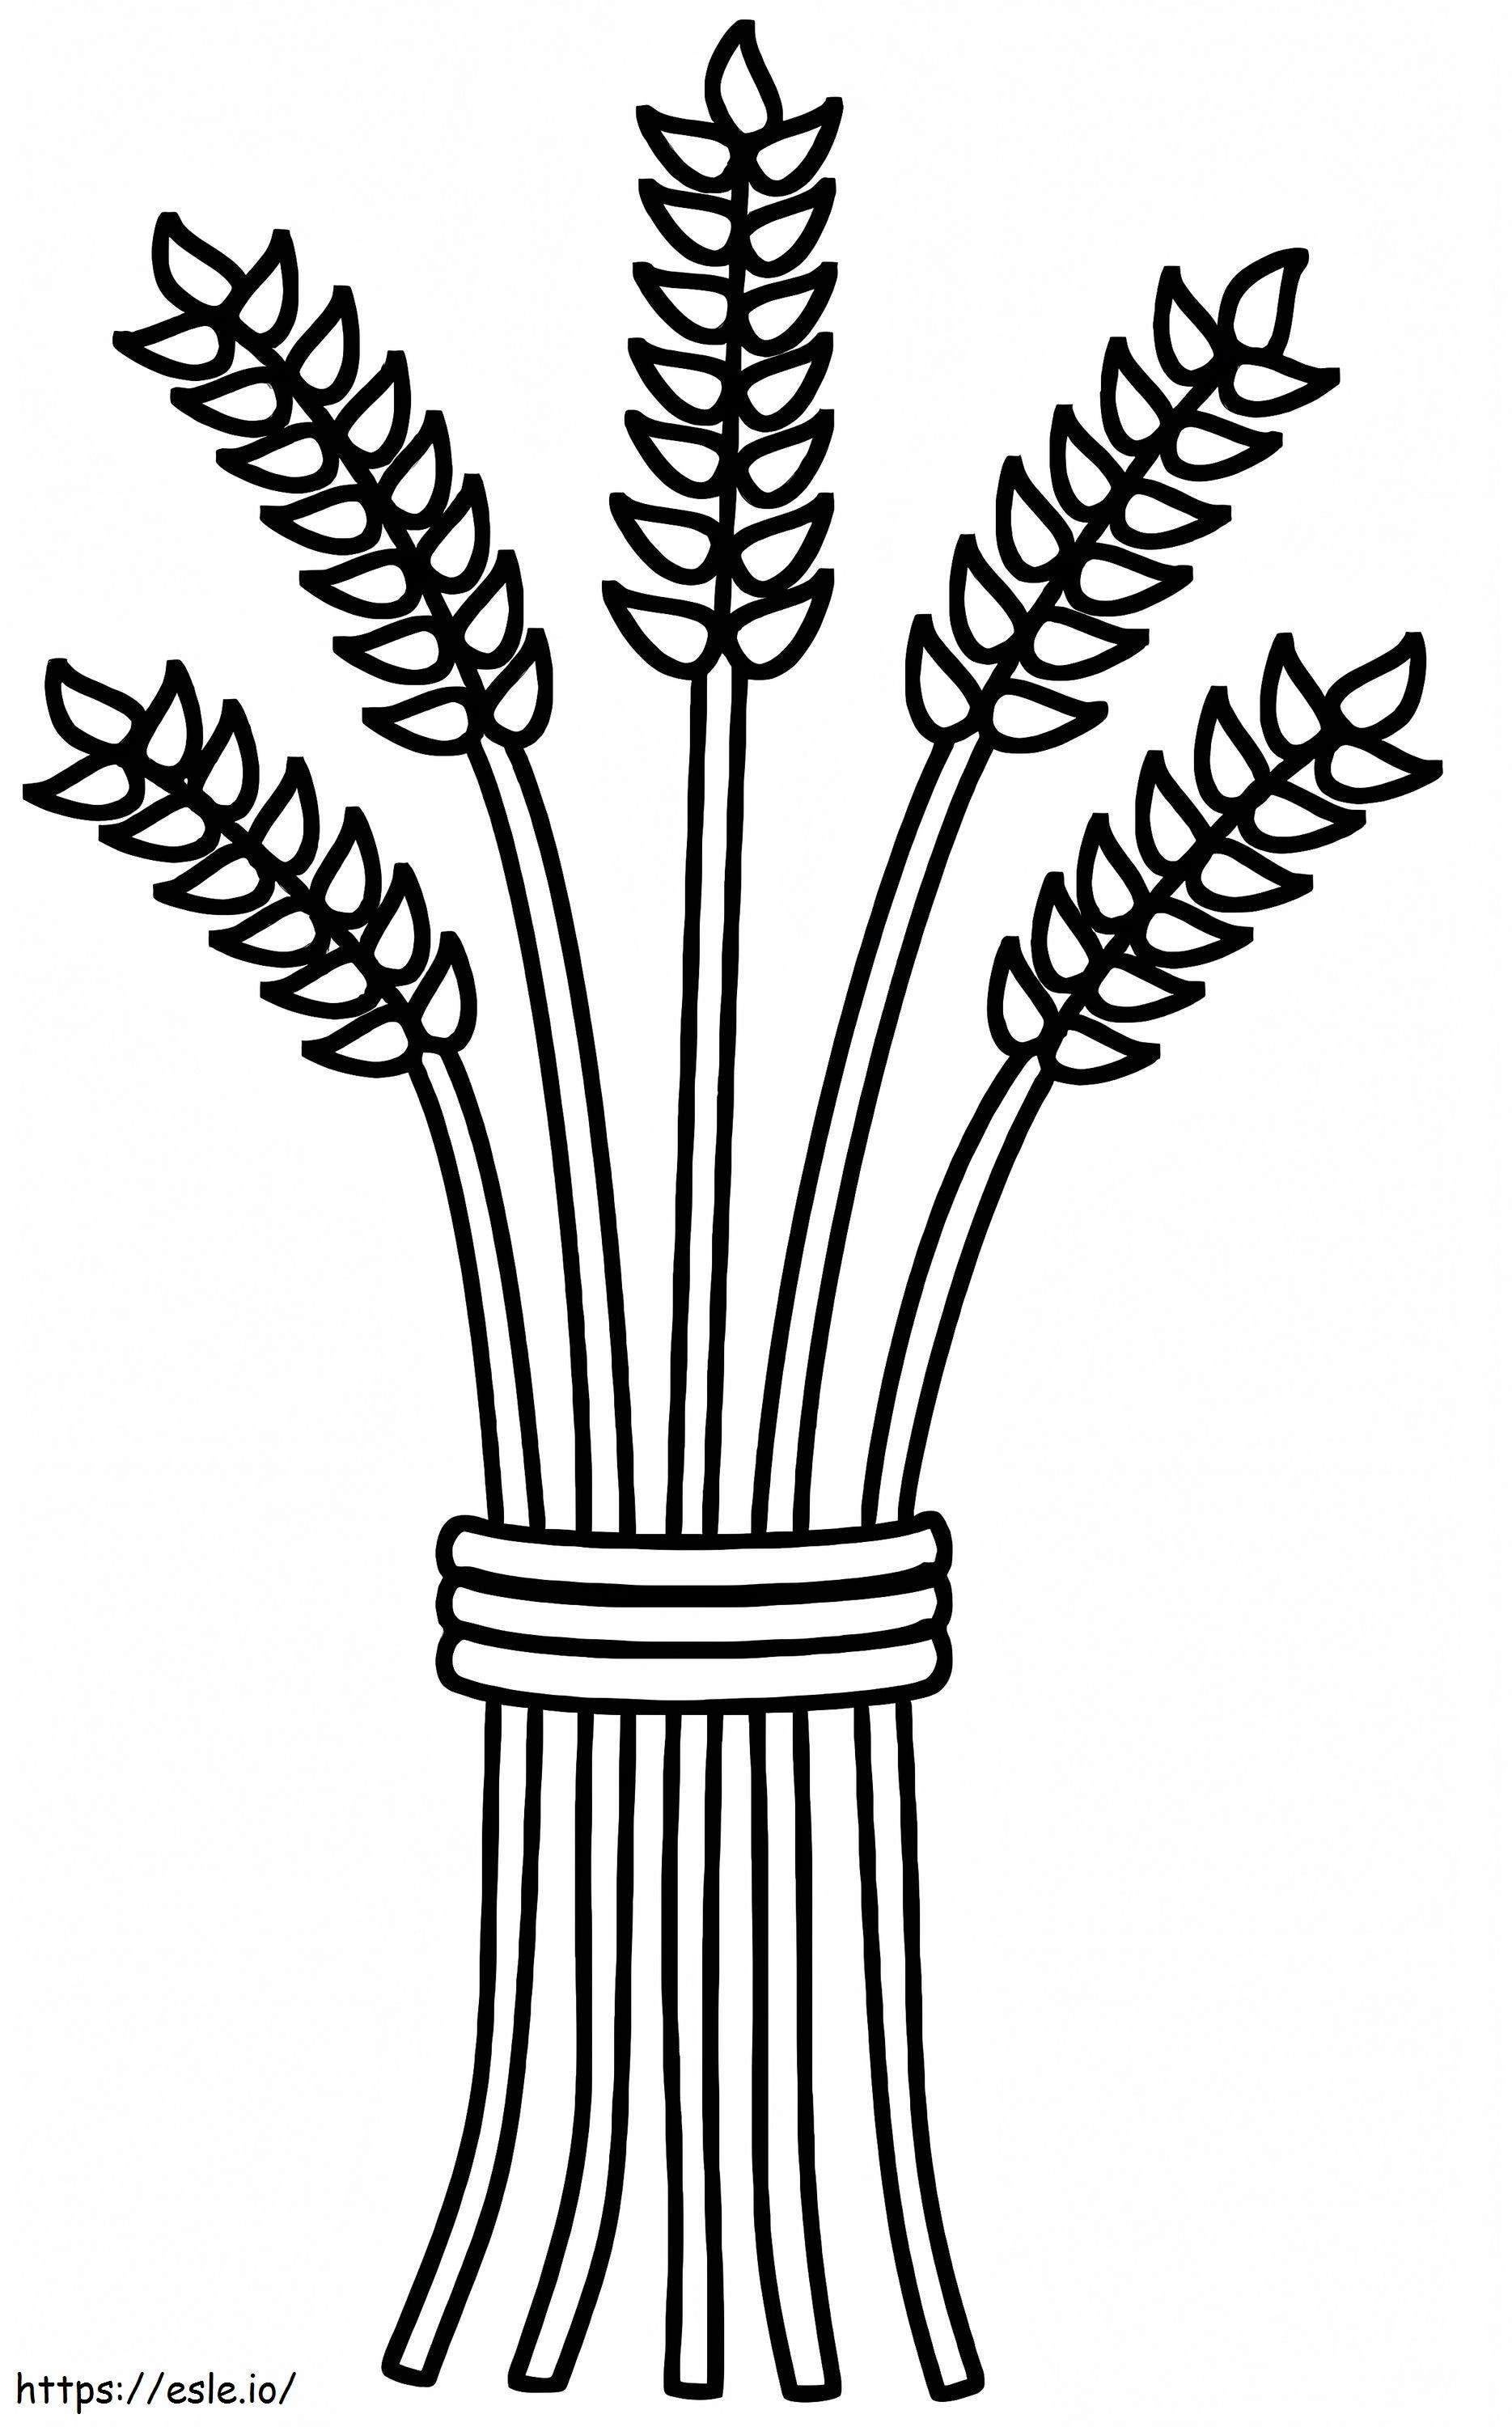 Five Wheats coloring page